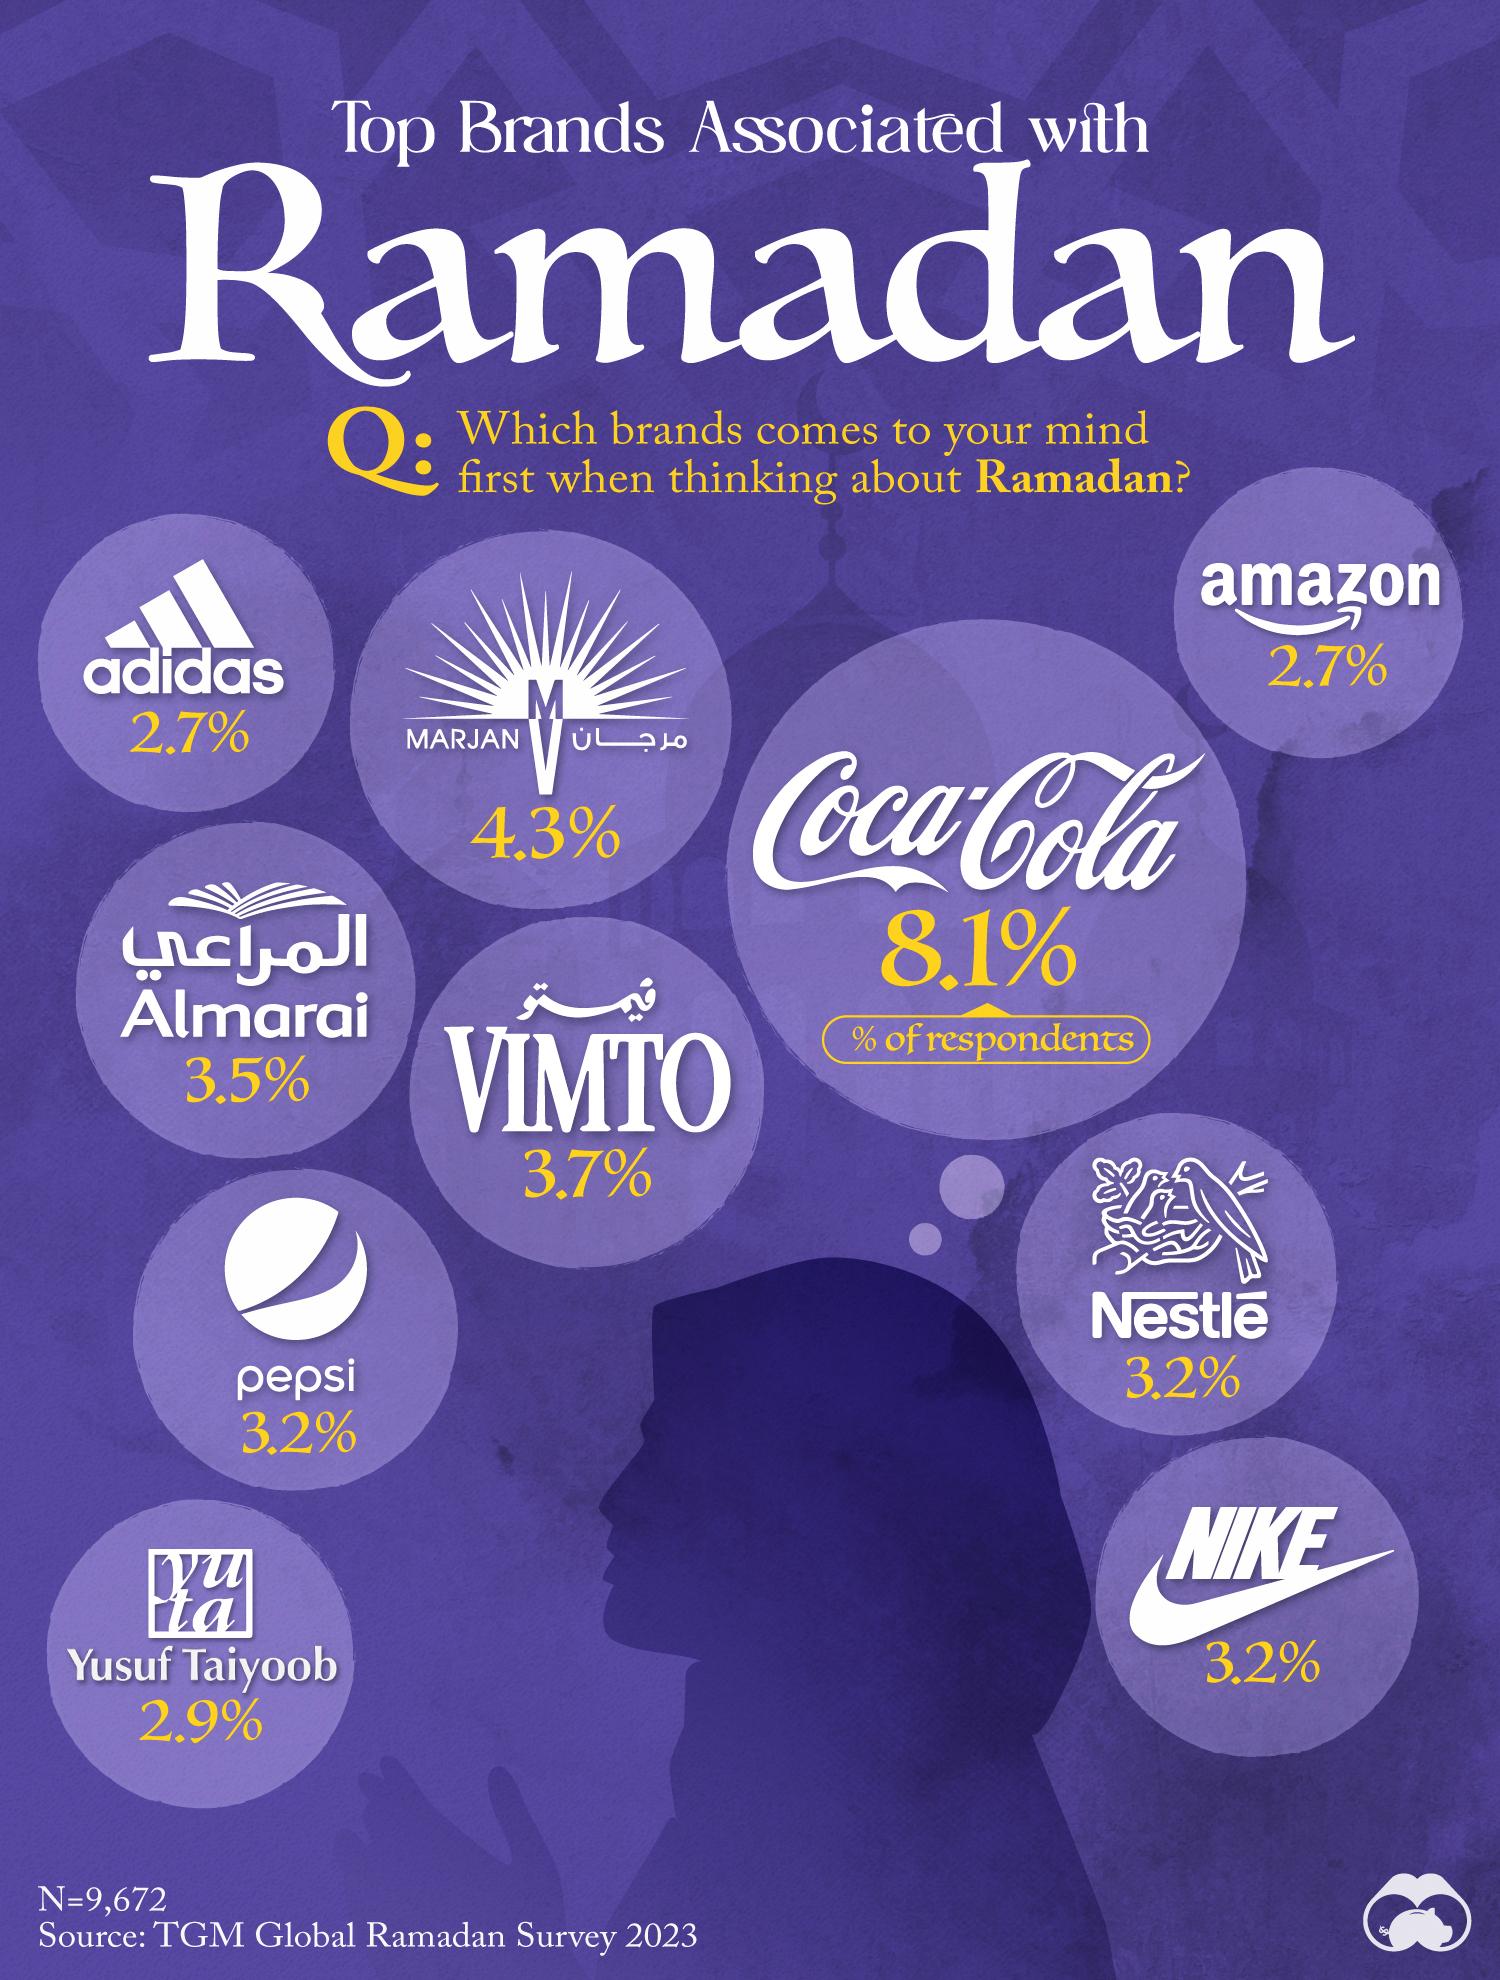 Coca-Cola is the Most Prominent Brand During Ramadan 🎅